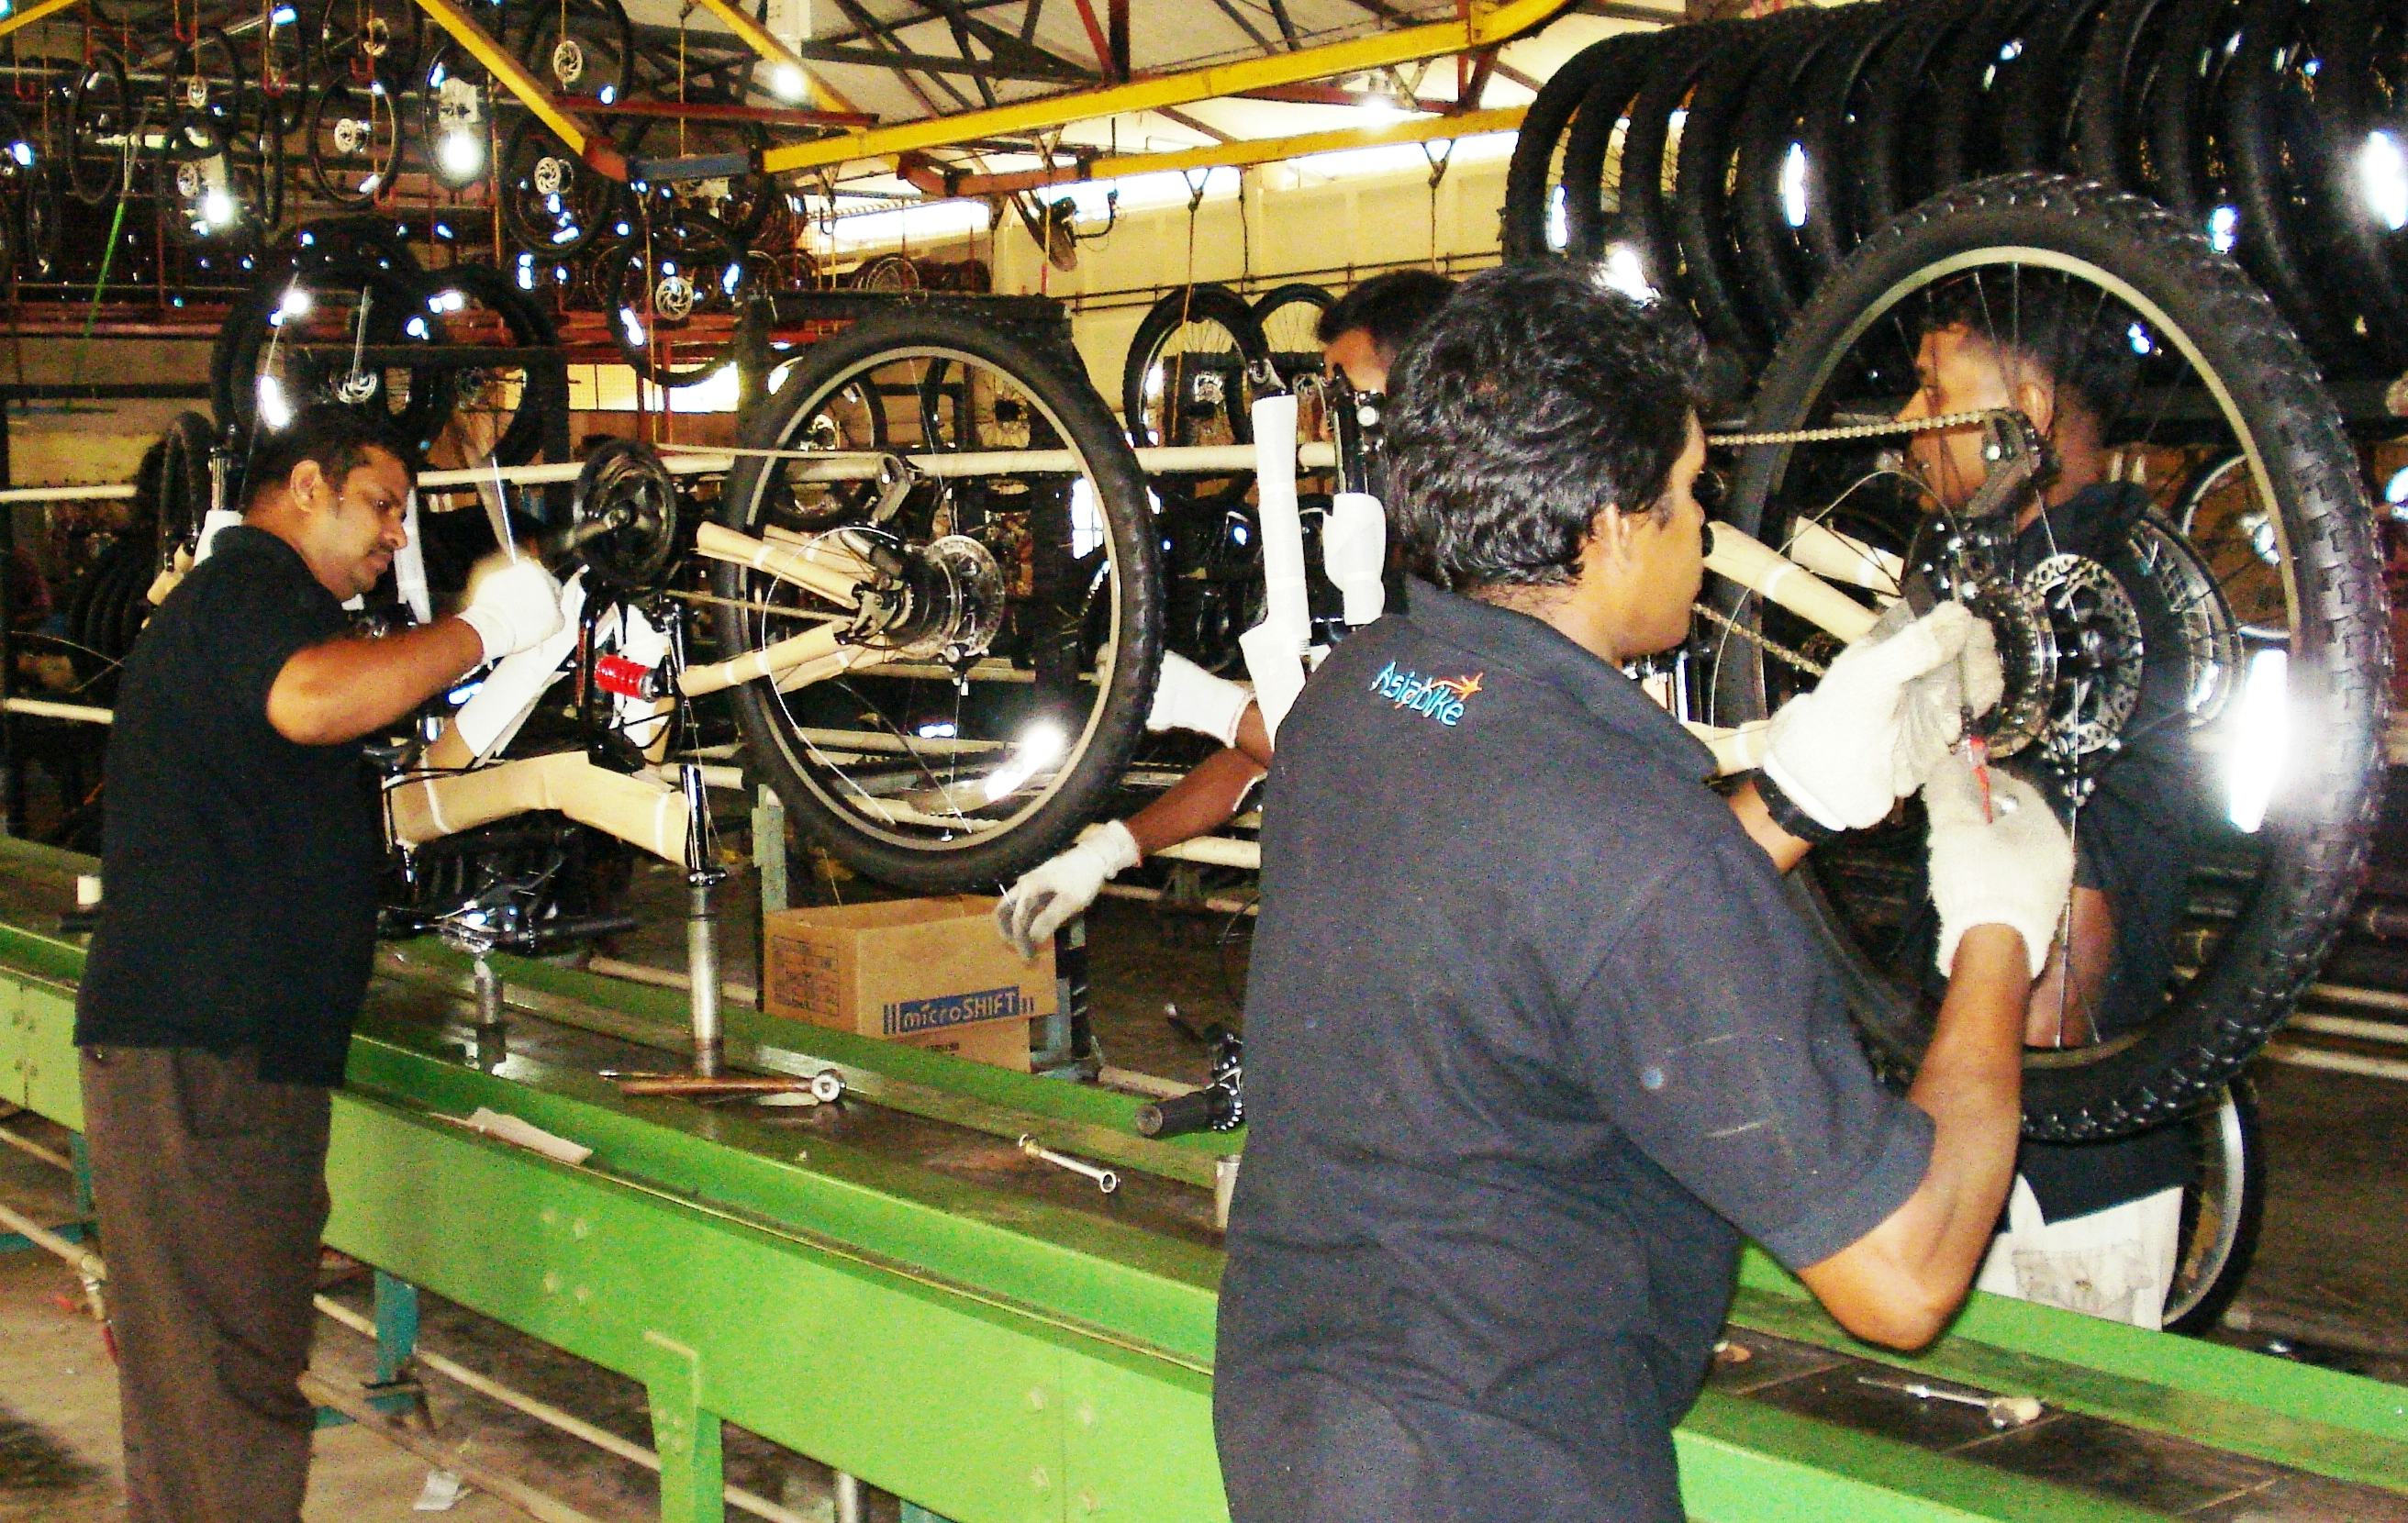 Europe is Sri Lanka’s biggest export market. In 2010, bicycle imports reached a record high of 1.2 million units. That import crumbled since. – Photo Asiabike